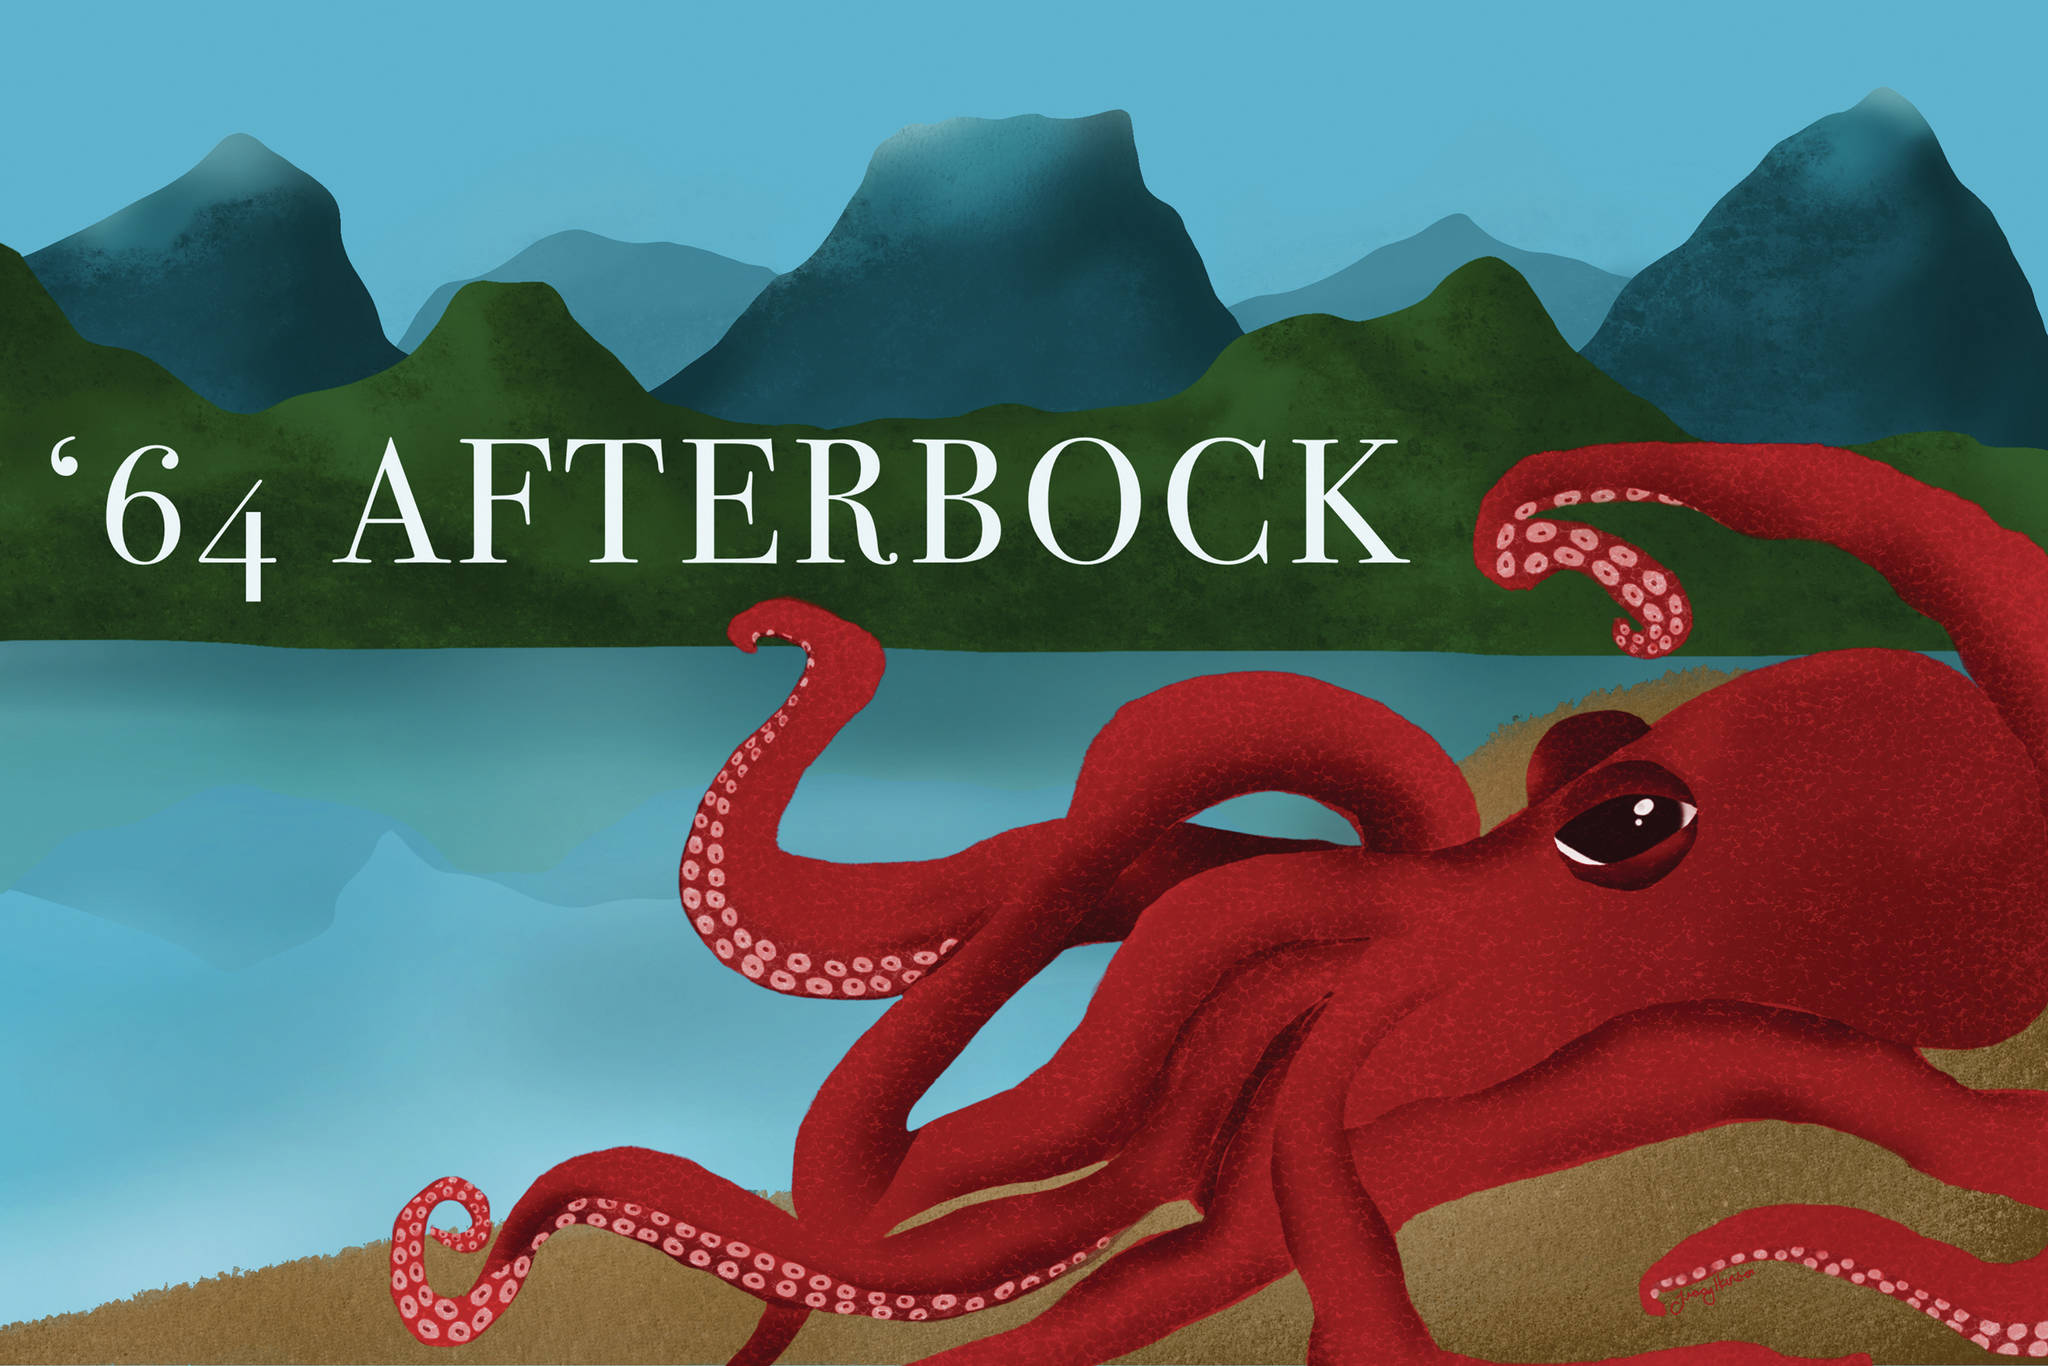 Tracey Hansen's design for Grace Ridge Brewery's '64 Afterbock beer label contest to commemorate the 20th anniversary of the Kachemak Bay National Estuarine Research Reserve (KBNERR). The designs go on exhibit and the winning label will be revealed Friday, Feb. 5, 2021, at the brewery in Homer, Alaska. (Photo courtesy of Grace Ridge Brewery)